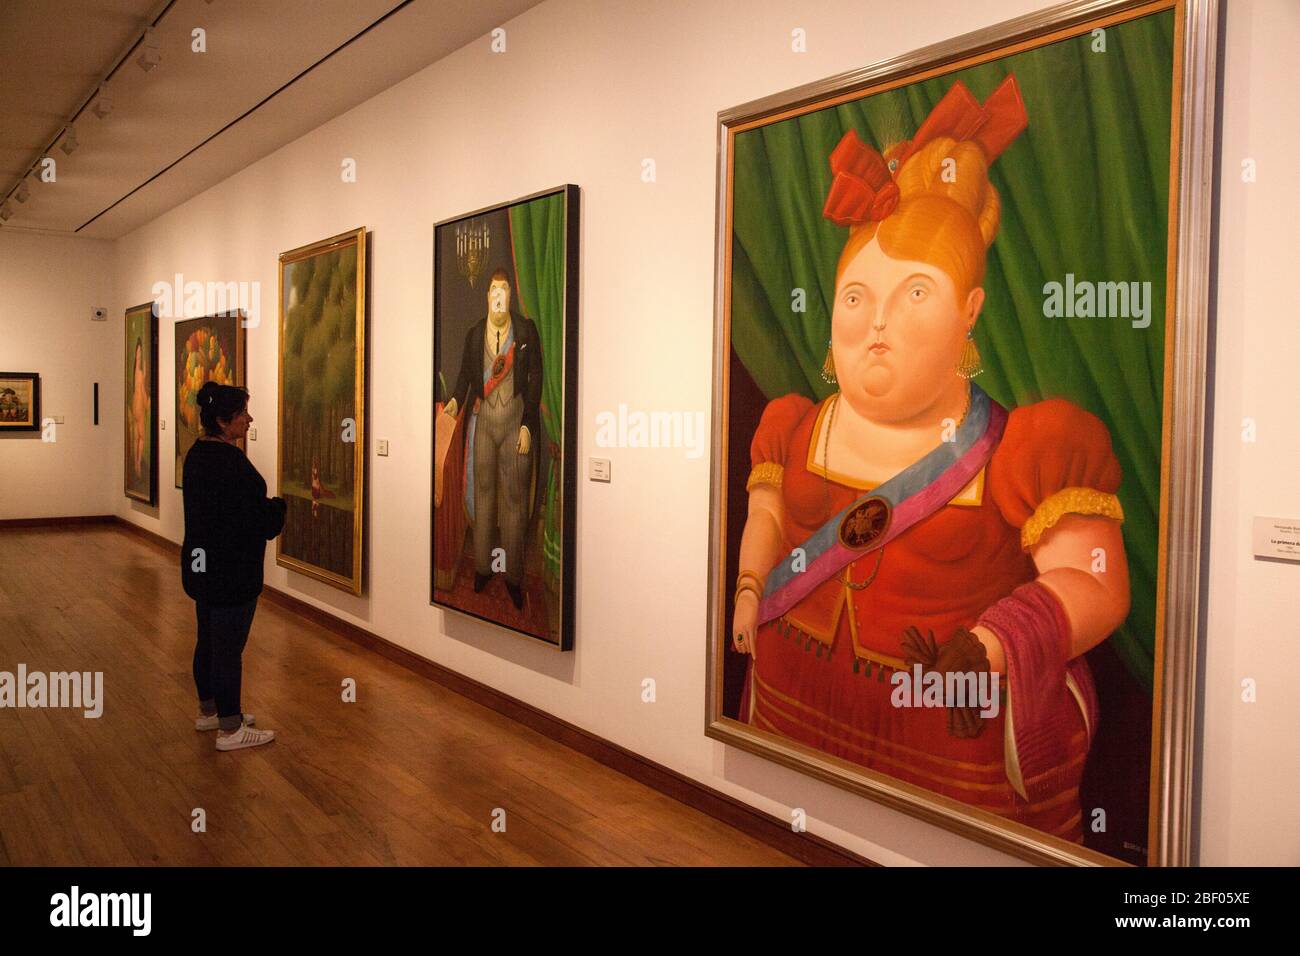 Onlookers admiring the La primera dama, First Lady painting by Botero in a gallery at the Botero Museum also known as Museo Botero, Bogotá, Colombia Stock Photo